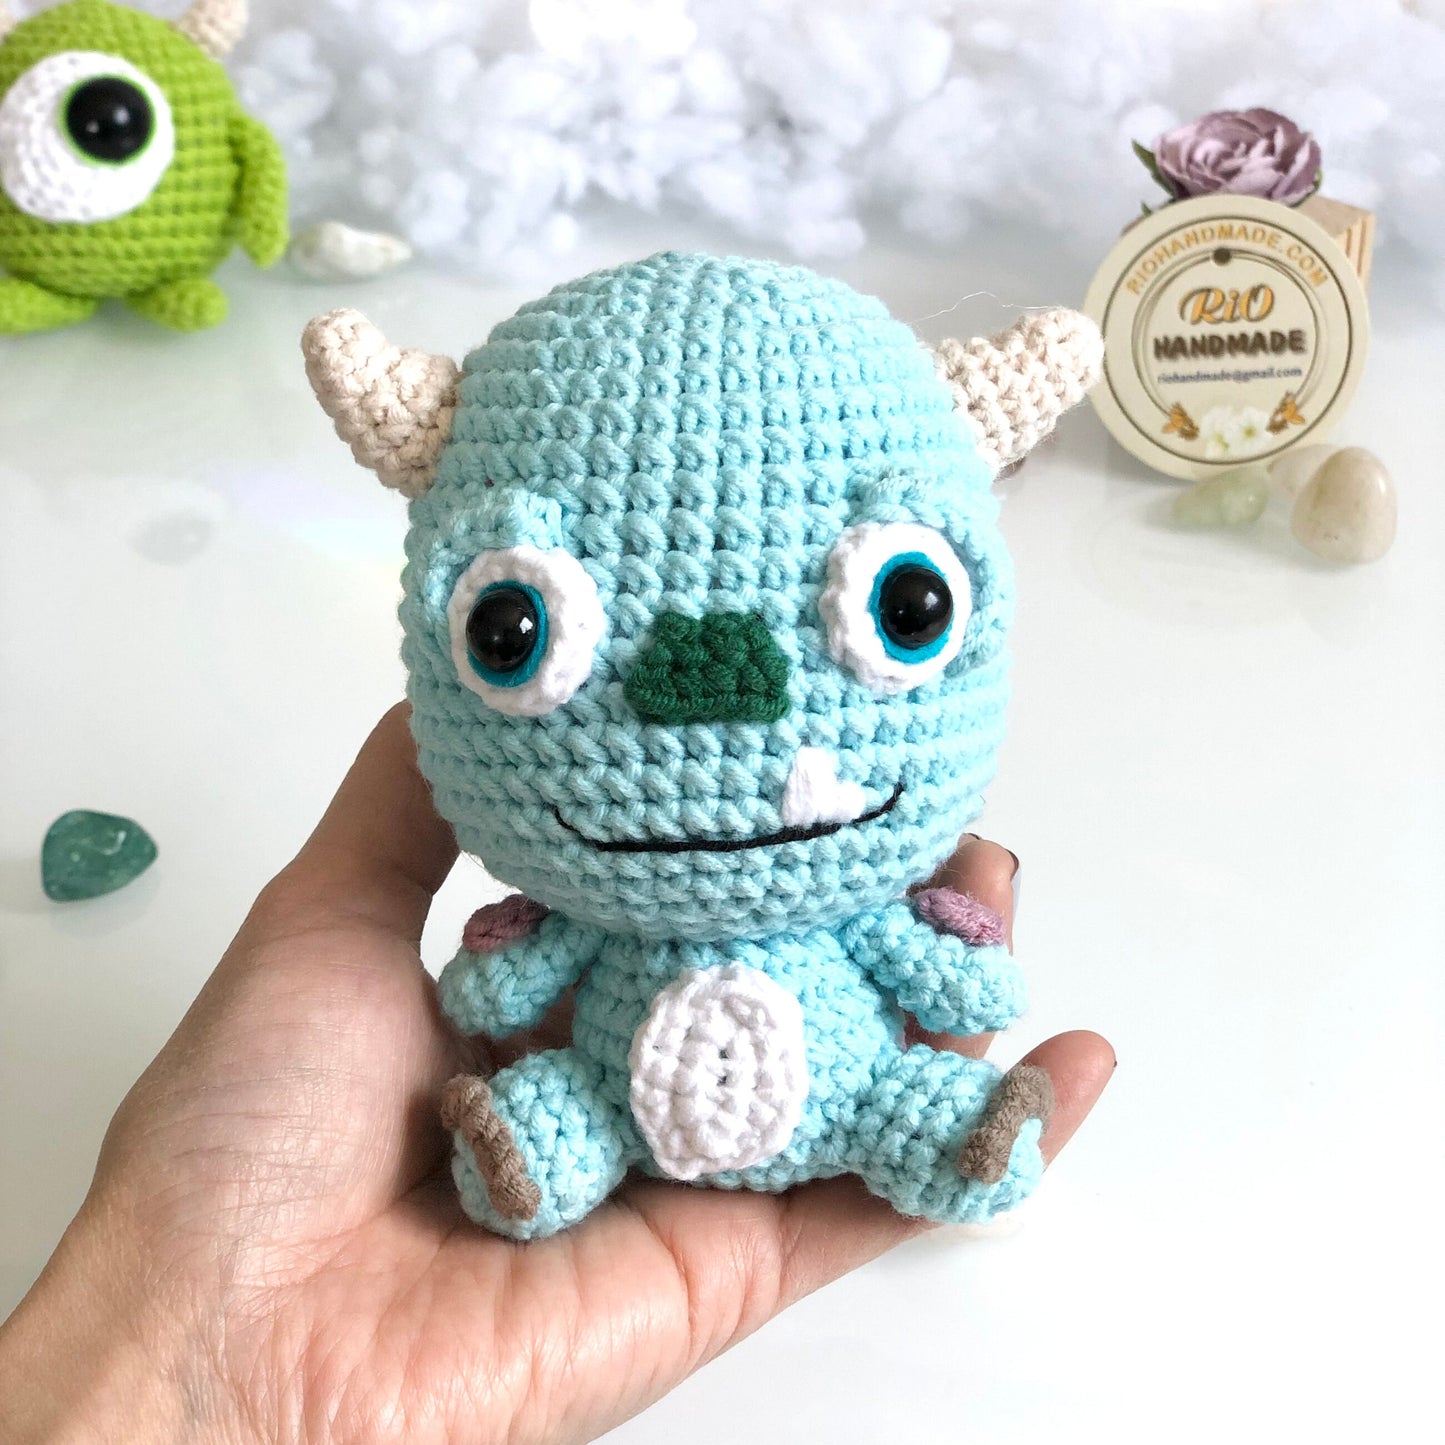 Handmade monster crochet, amigurumi Mike Wazowski, Sully, Crochet toys inspired by Monster Inc. plushie toy, cute gift